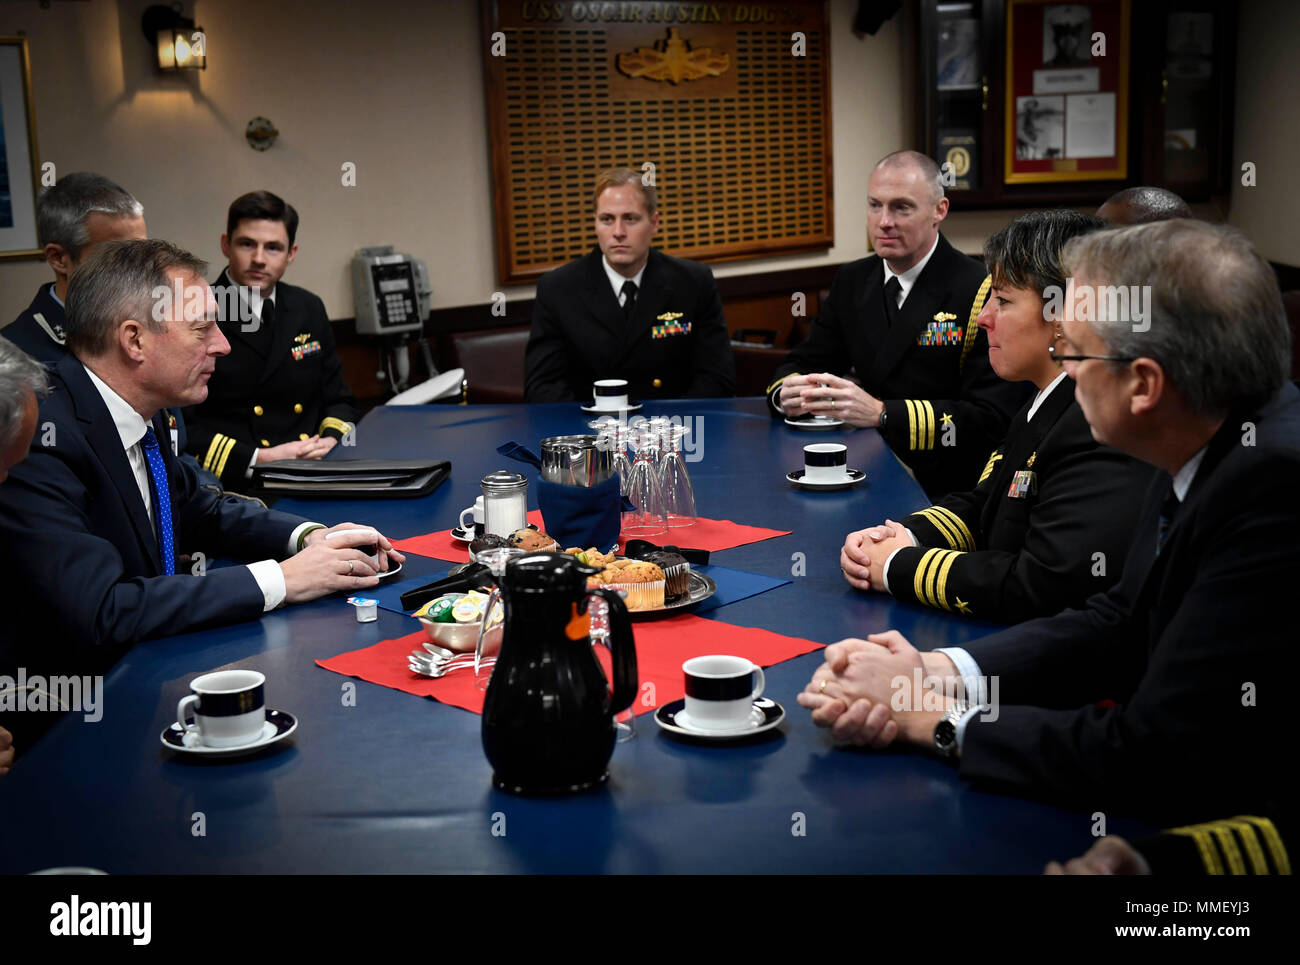 171030-N-UY653-025 OSLO, Norway (Oct. 30, 2017) Norwegian Defense Minister Frank Bakke-Jensen, left, speaks to Sailors assigned to the Arleigh Burke-class guided-missile destroyer USS Oscar Austin (DDG 79). Oscar Austin is on a deployment in support of U.S. national security interests in Europe, and increasing theater security cooperation and forward naval presence in the U.S. 6th Fleet area of operations. (U.S. Navy photo by Mass Communication Specialist 2nd Class Ryan Utah Kledzik/Released) Stock Photo